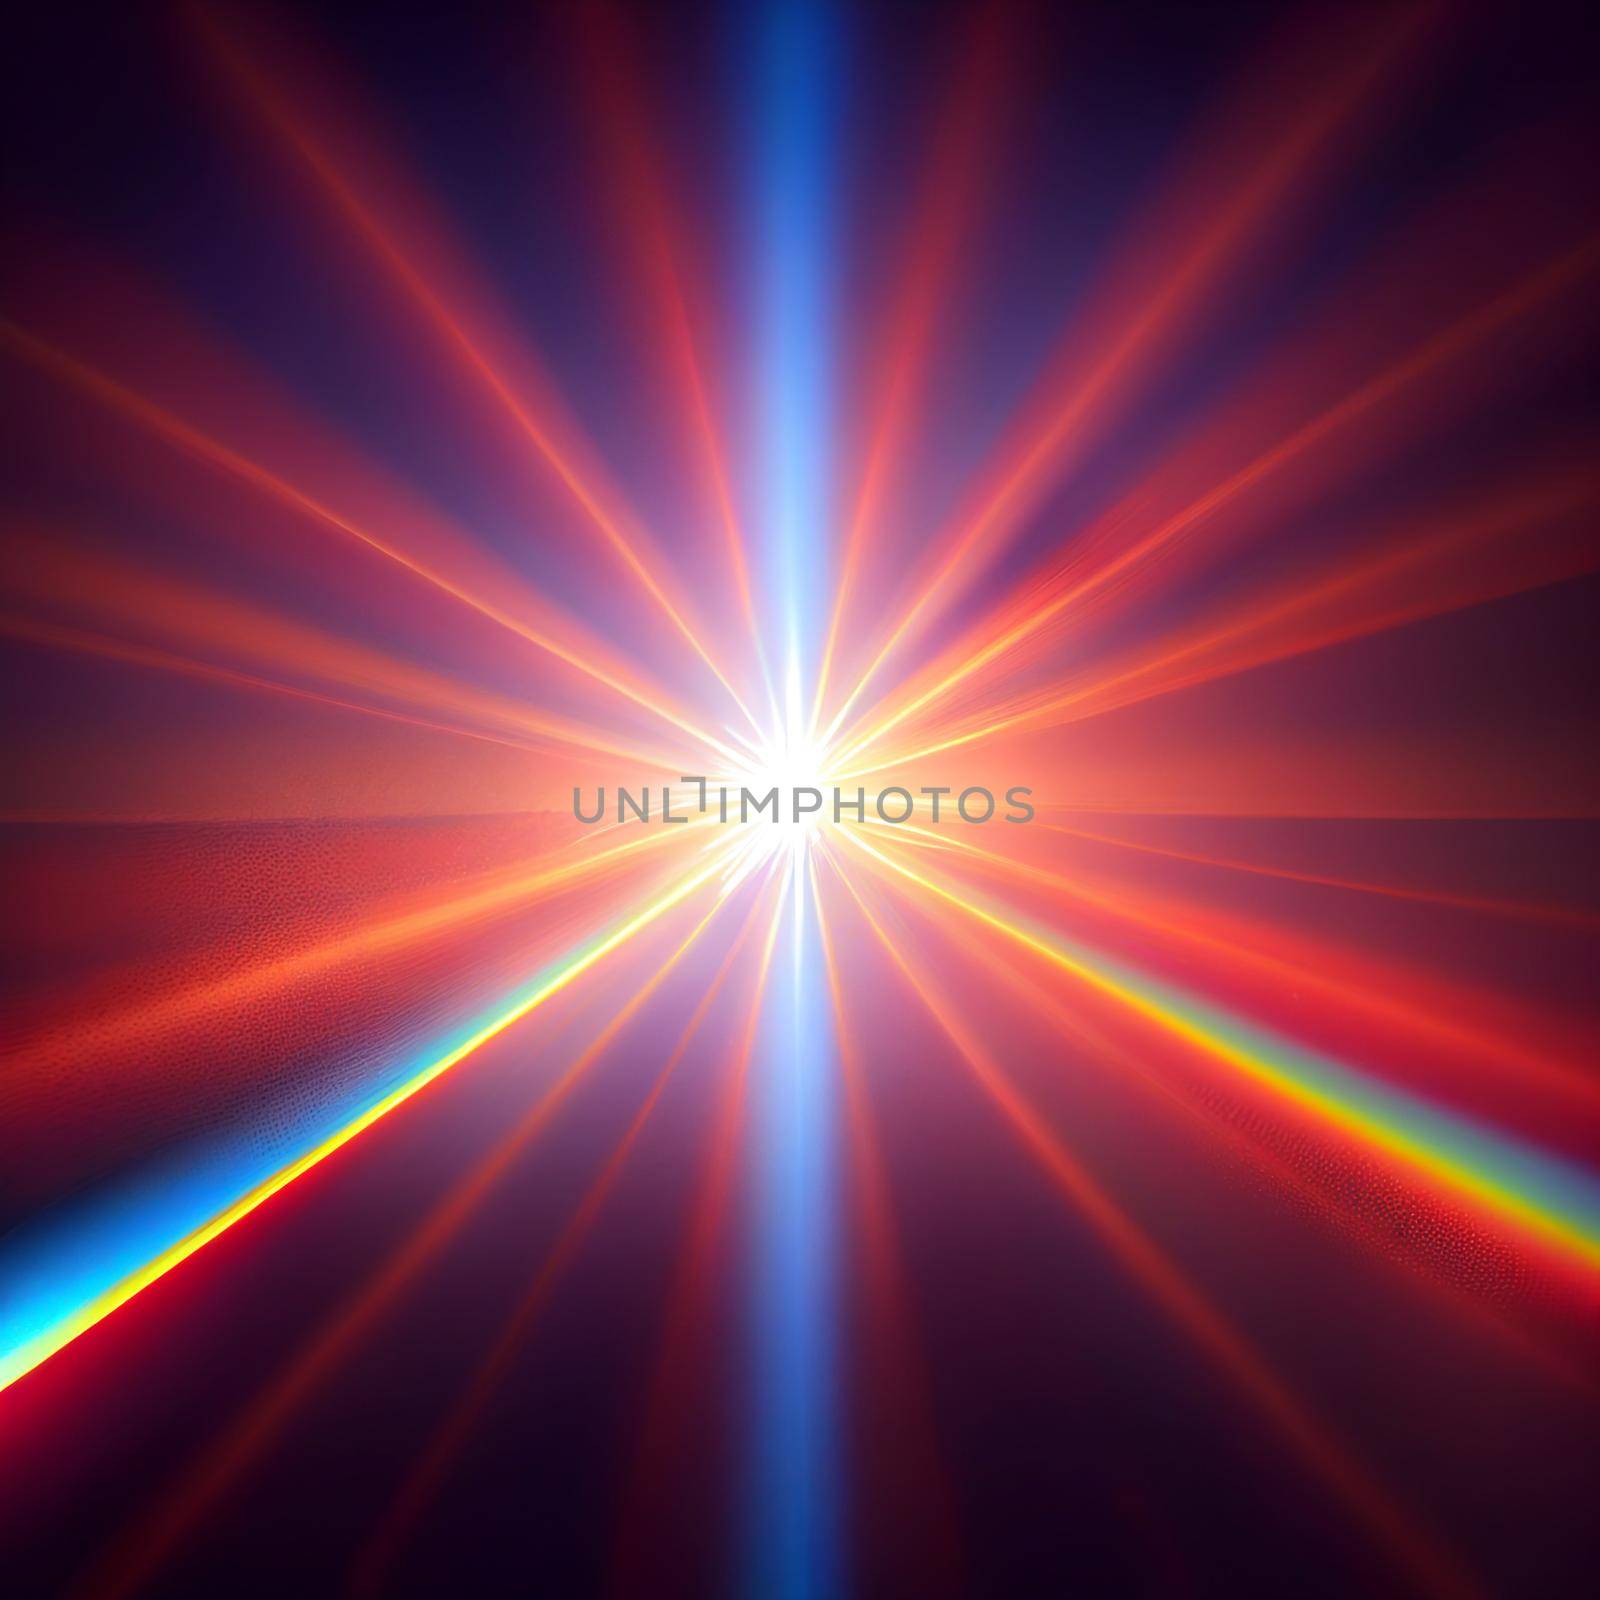 red Light Lens flare on black background. Lens flare with bright light isolated with a black background. Used for textures and materials.